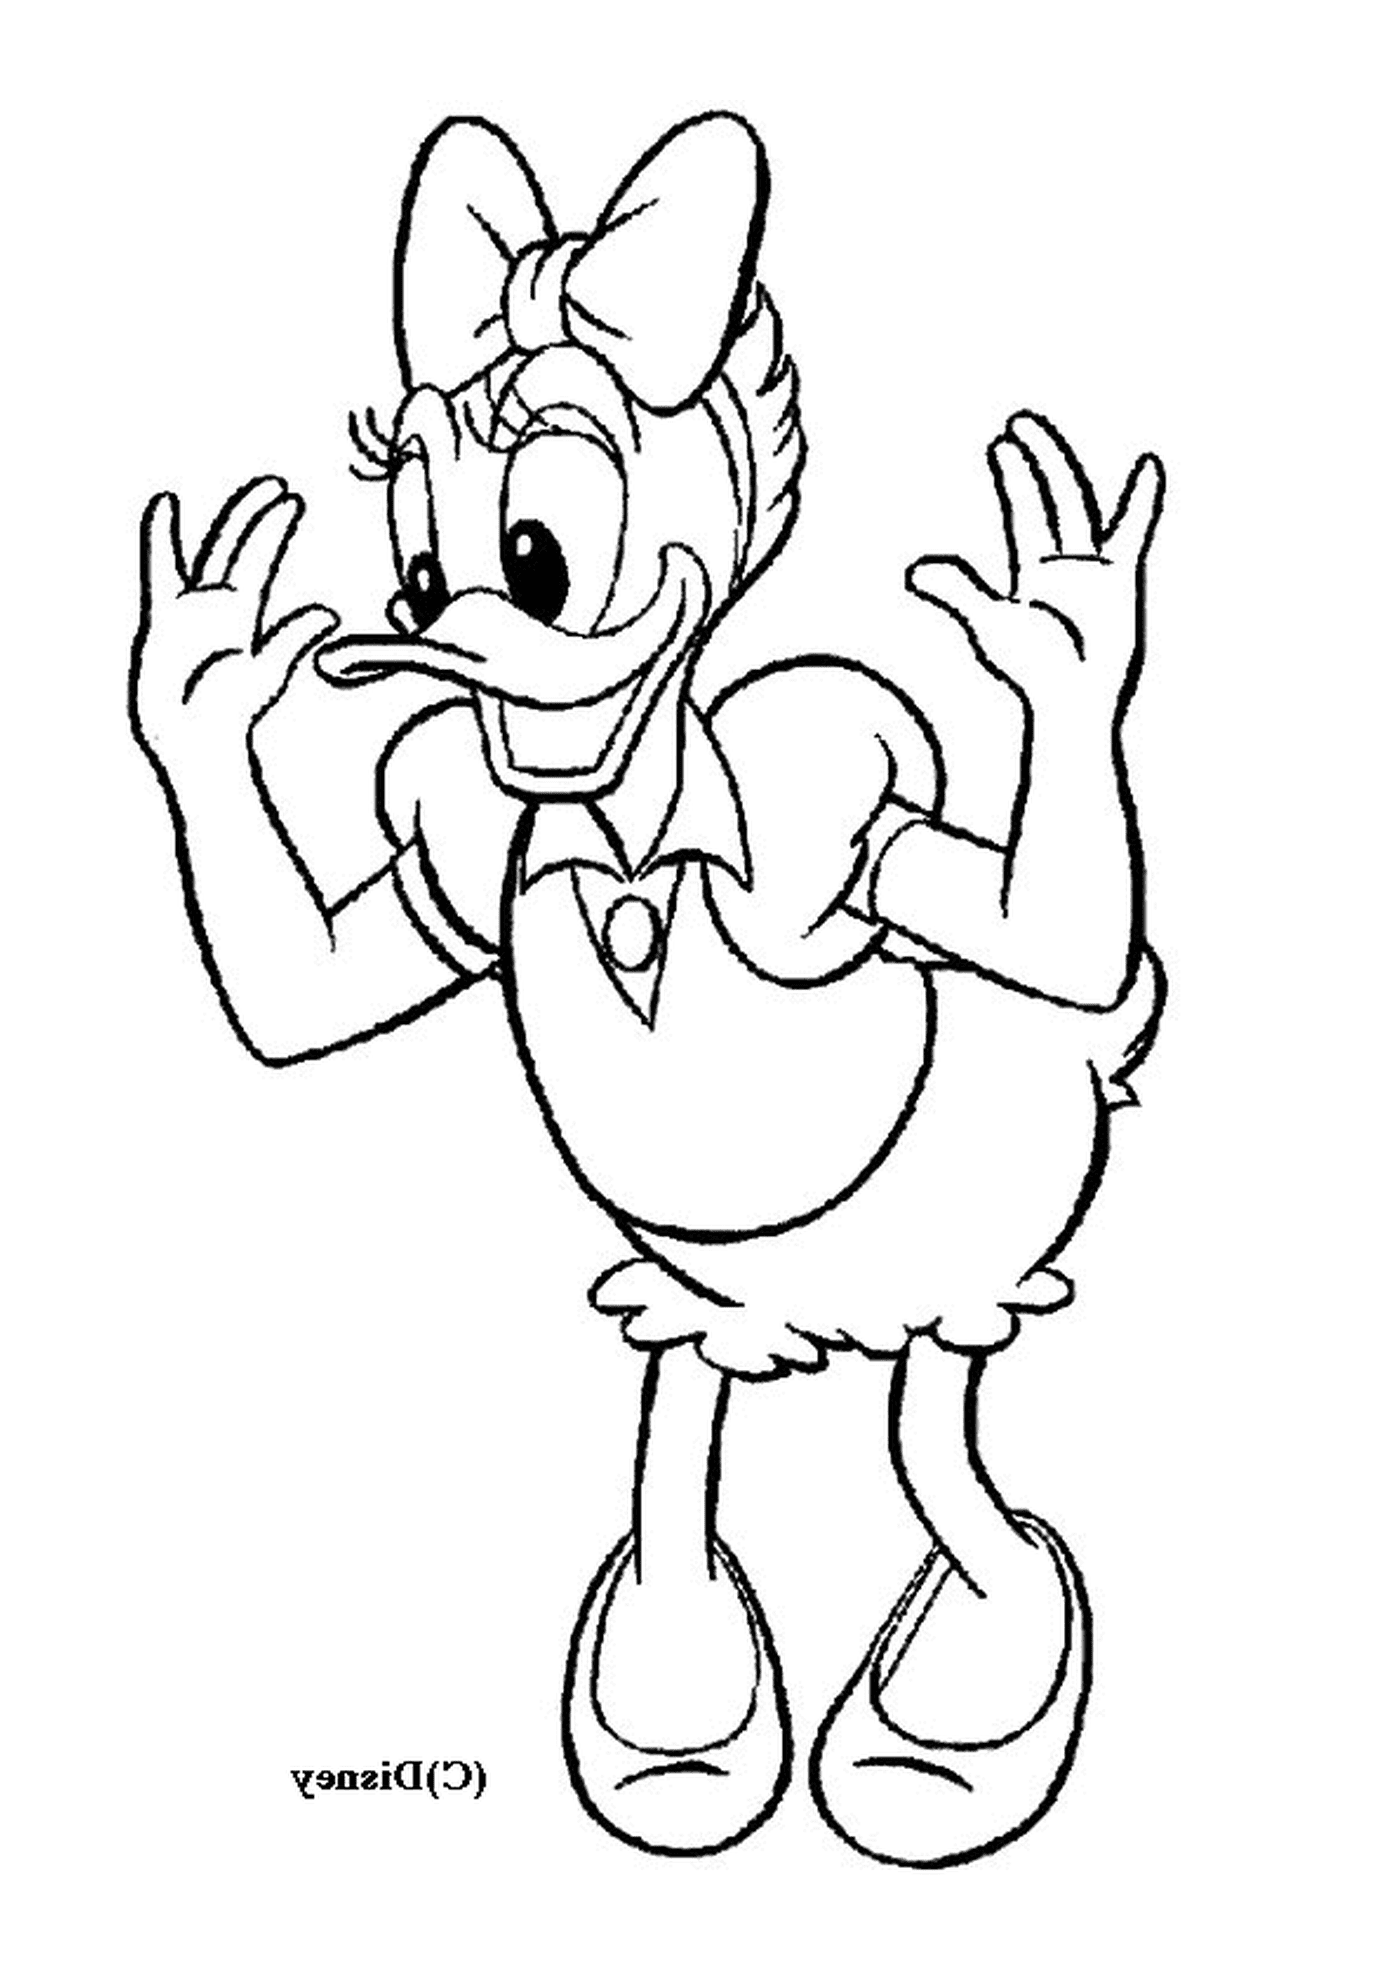  Daisy, Donald's girlfriend, dressed in a dress 